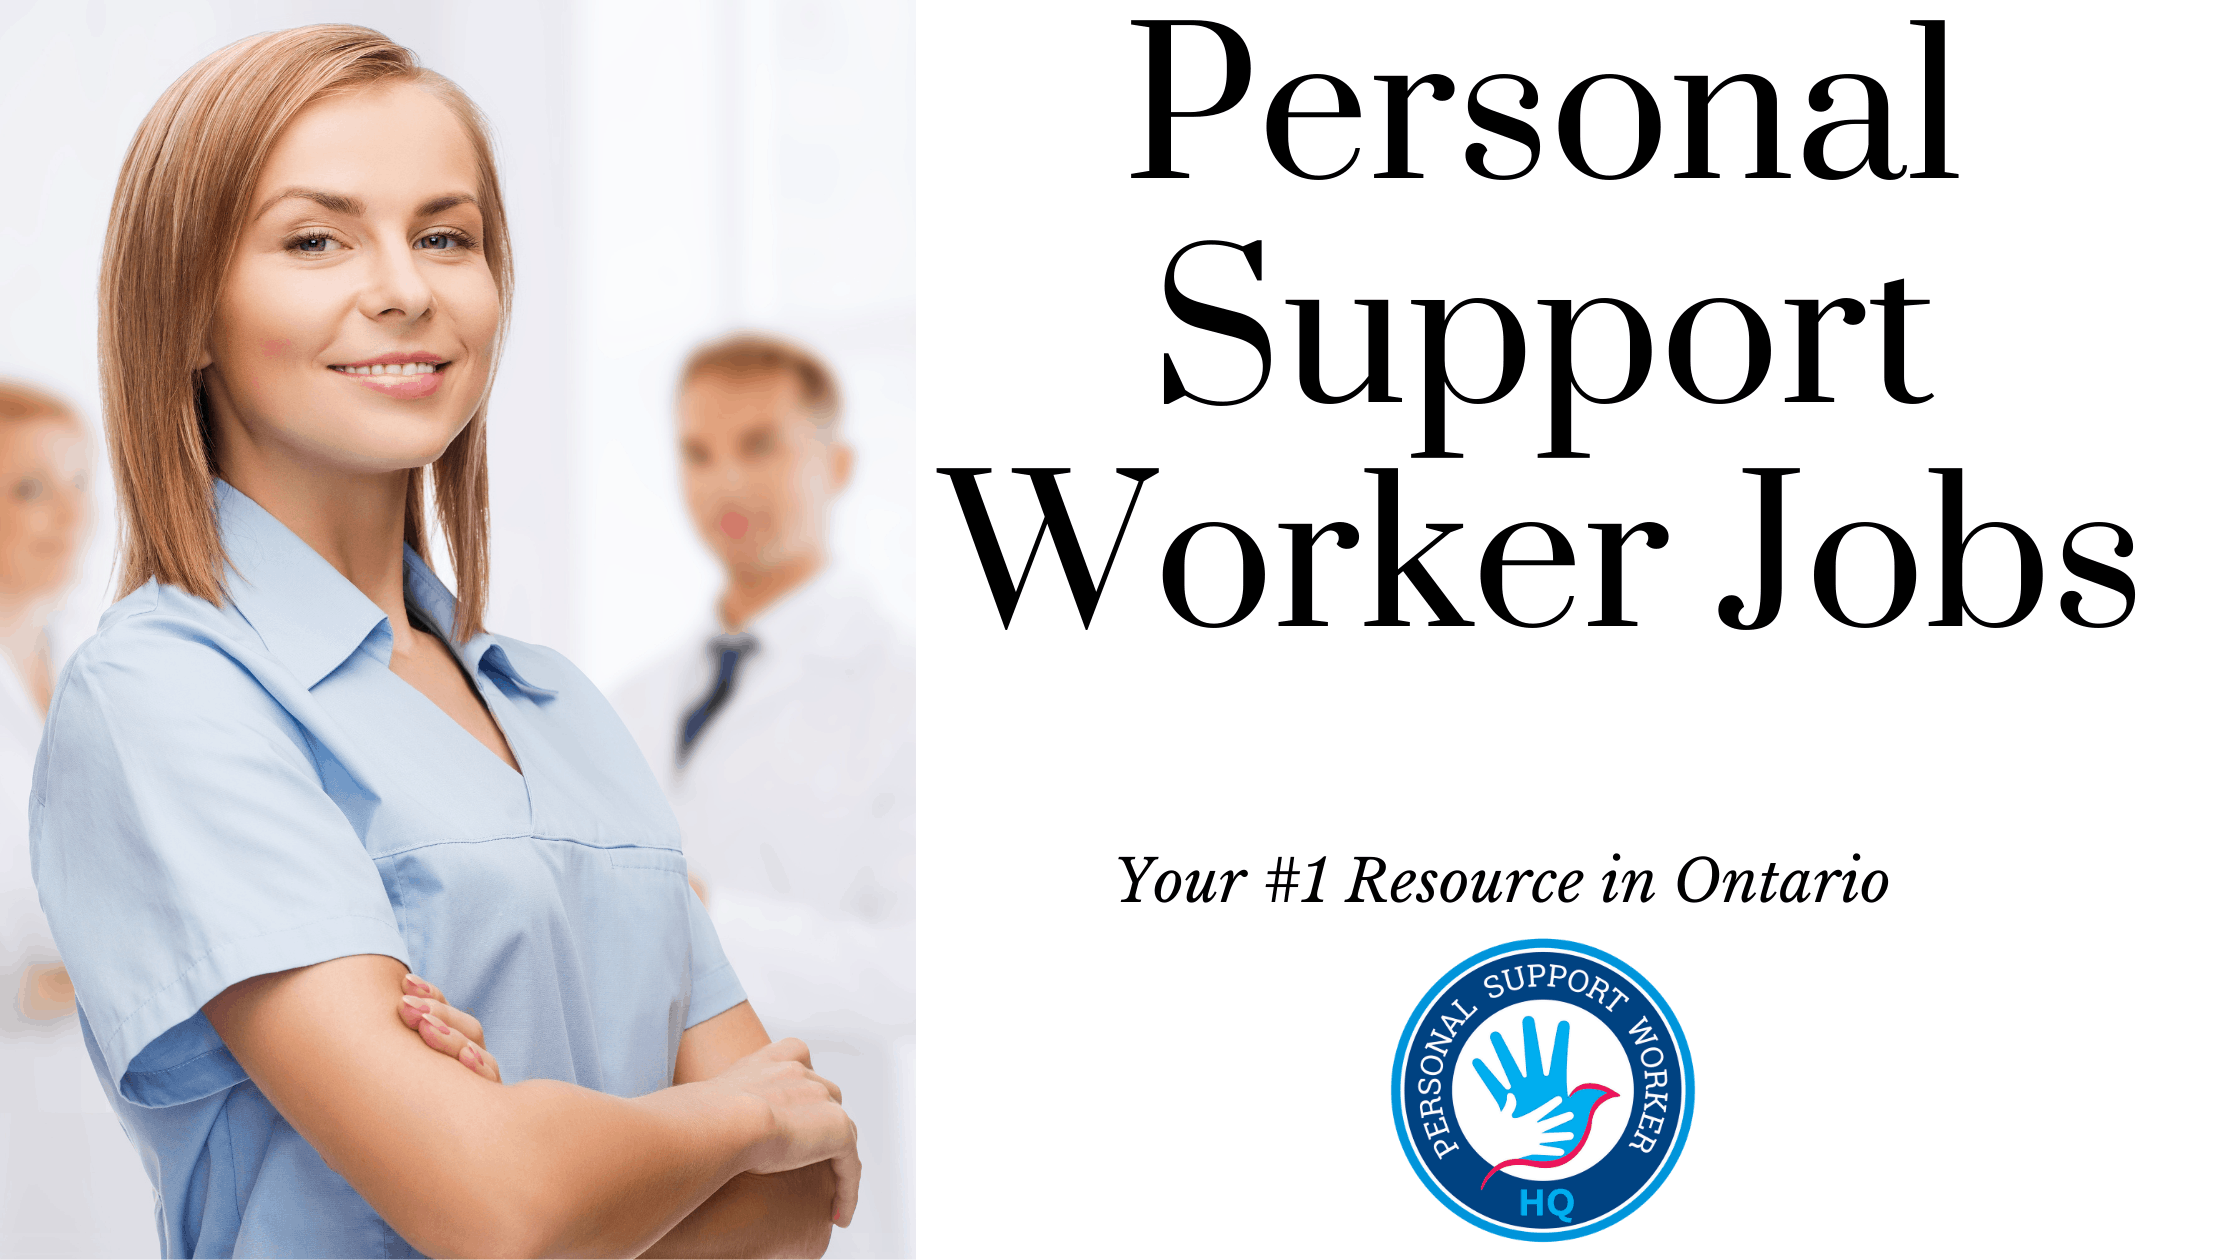 Www personal support worker jobs com